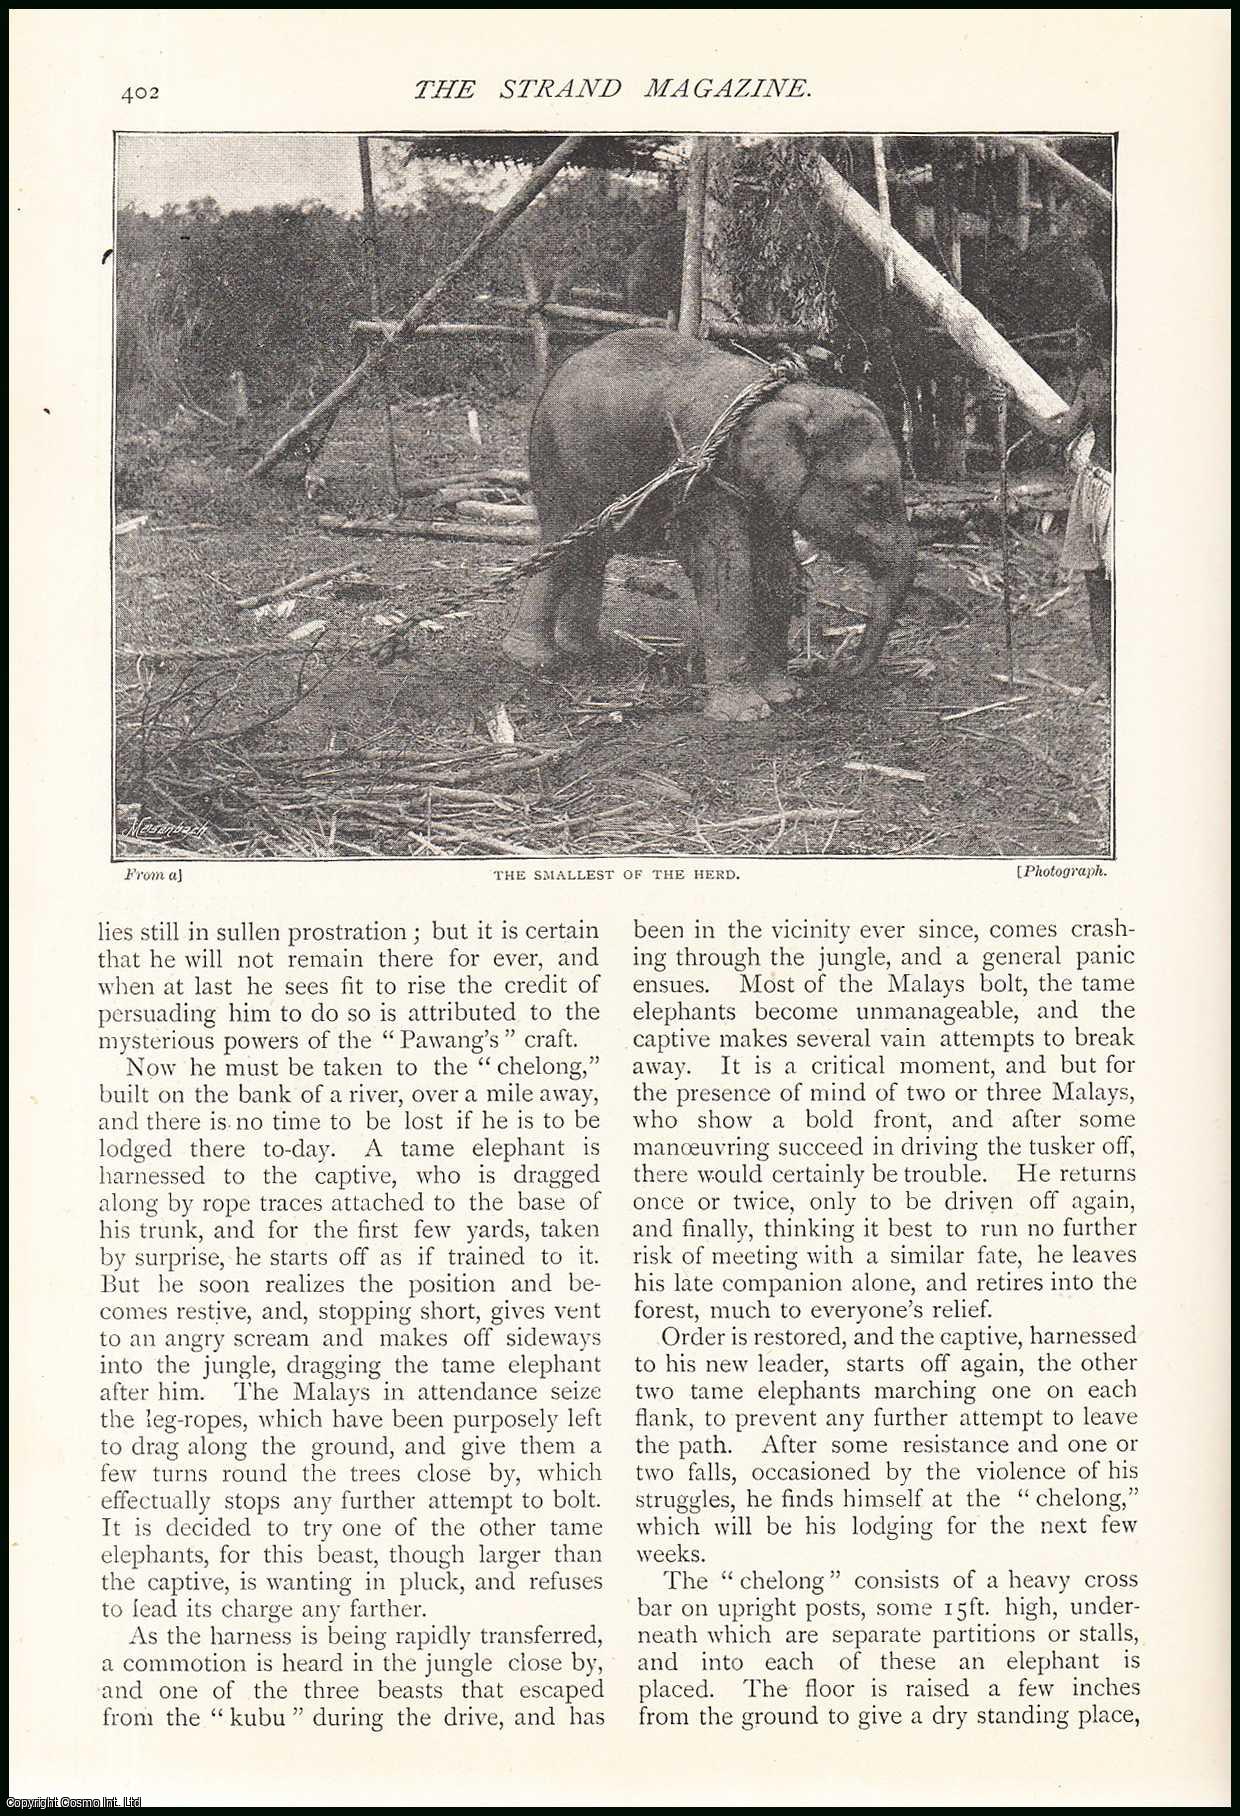 D.H. Wise - Elephant Catching : Perak (pronounced Pera), a Native State in the Malay Peninsula. An uncommon original article from The Strand Magazine, 1895.